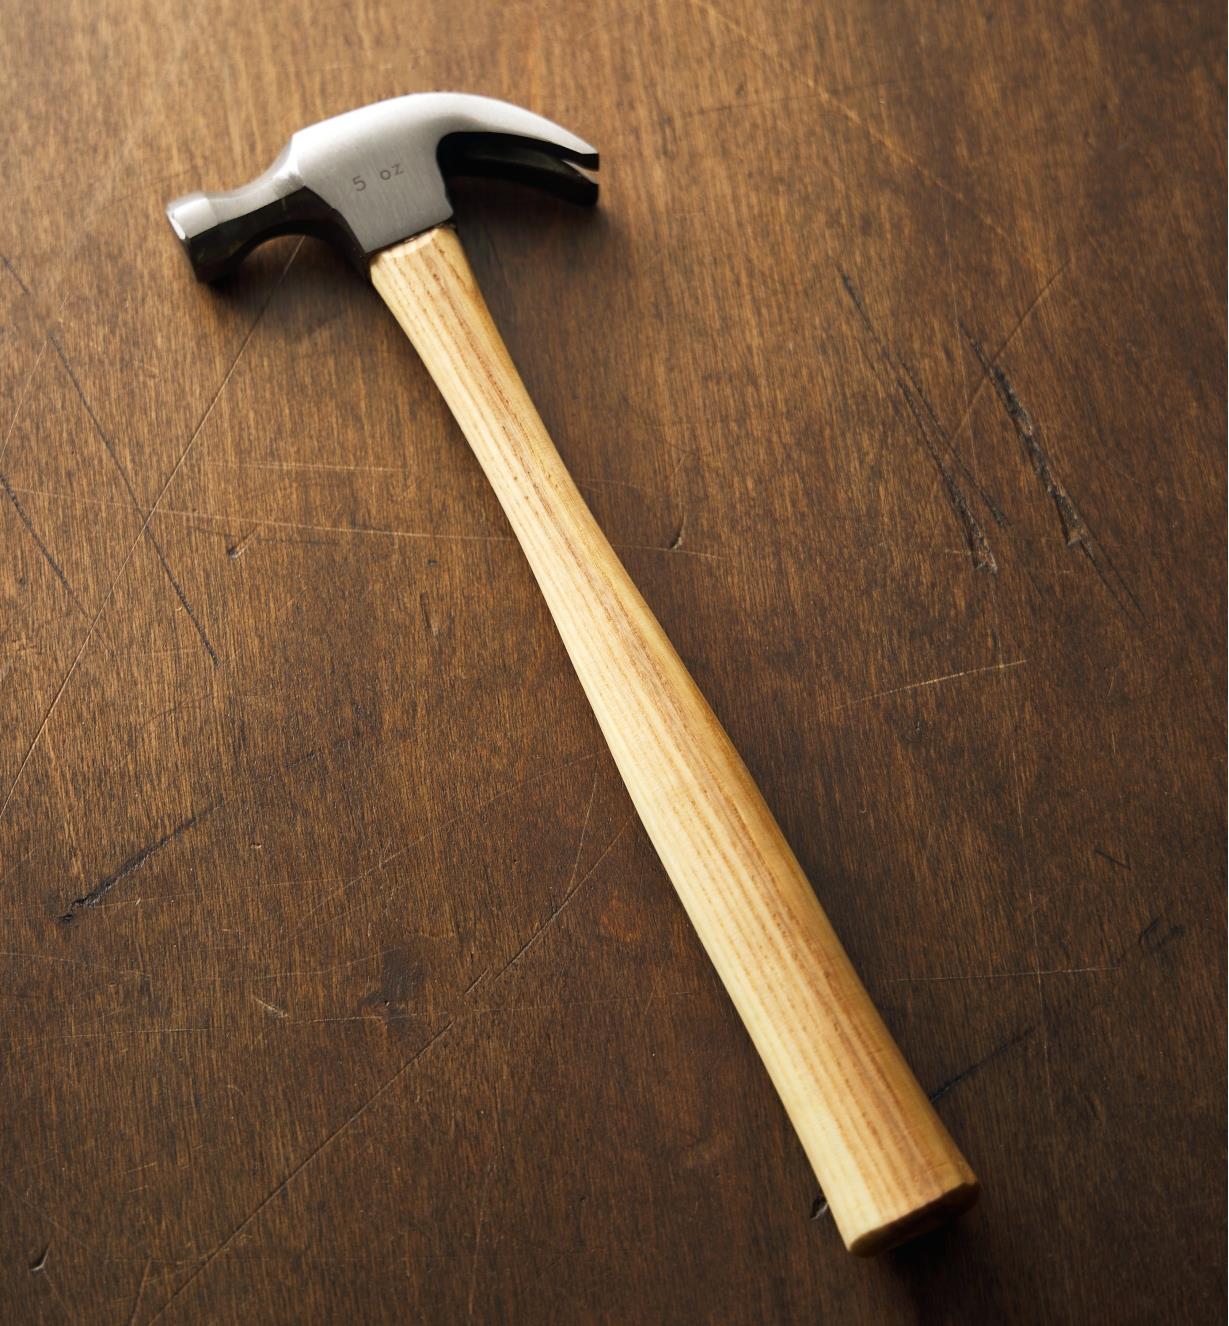 ThousWinds Wooden Handle Hammer – Thous Winds